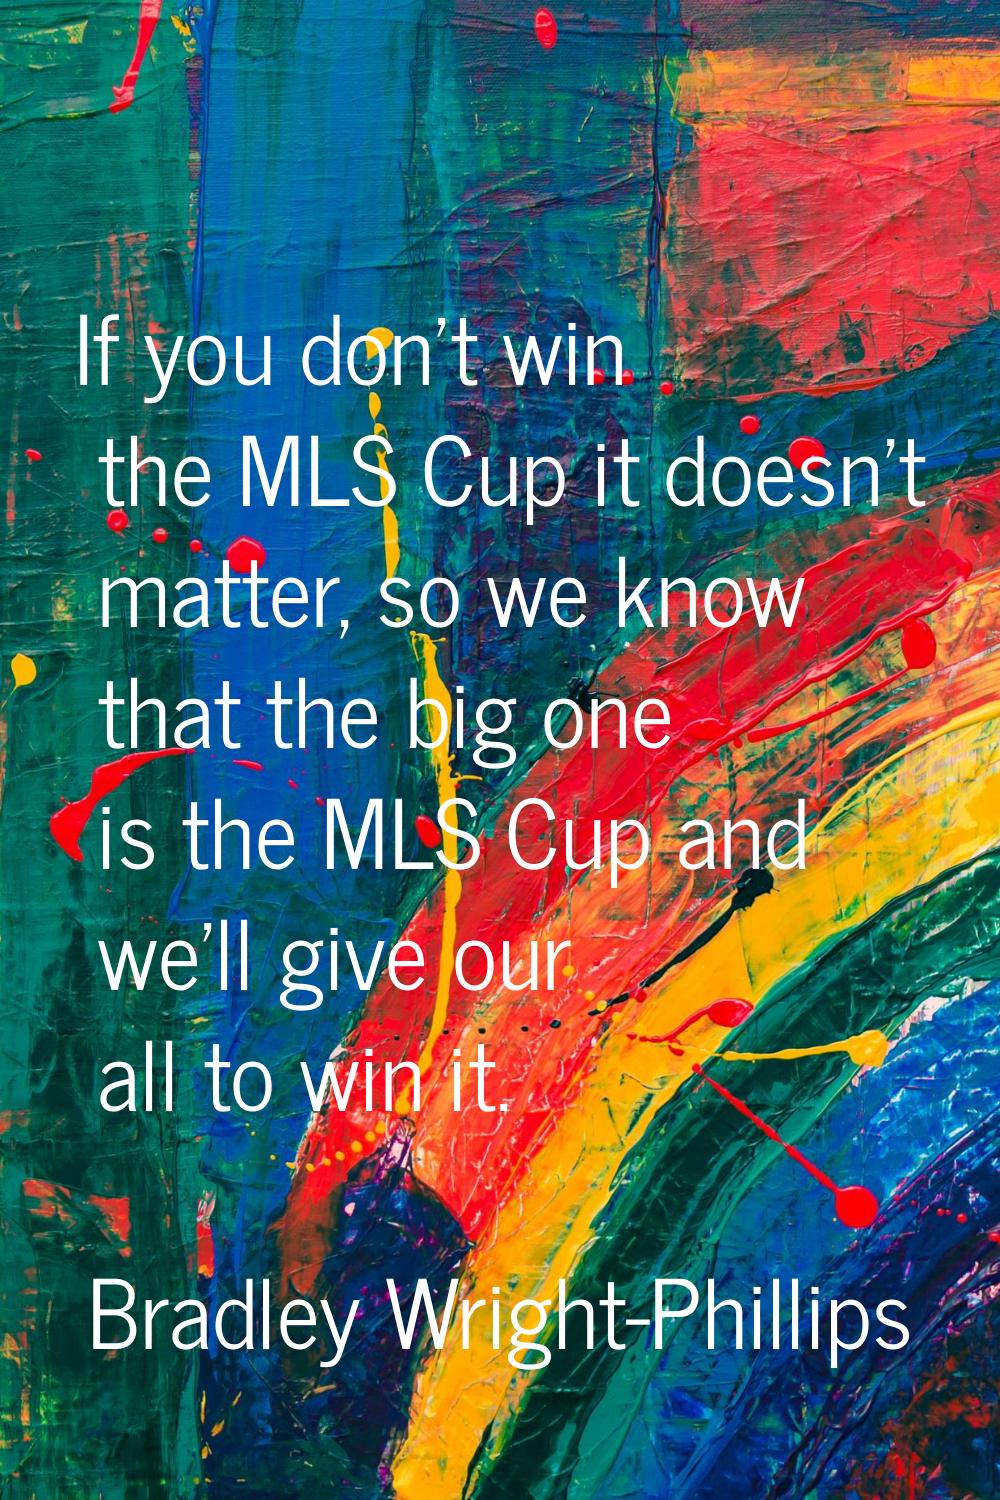 If you don't win the MLS Cup it doesn't matter, so we know that the big one is the MLS Cup and we'l